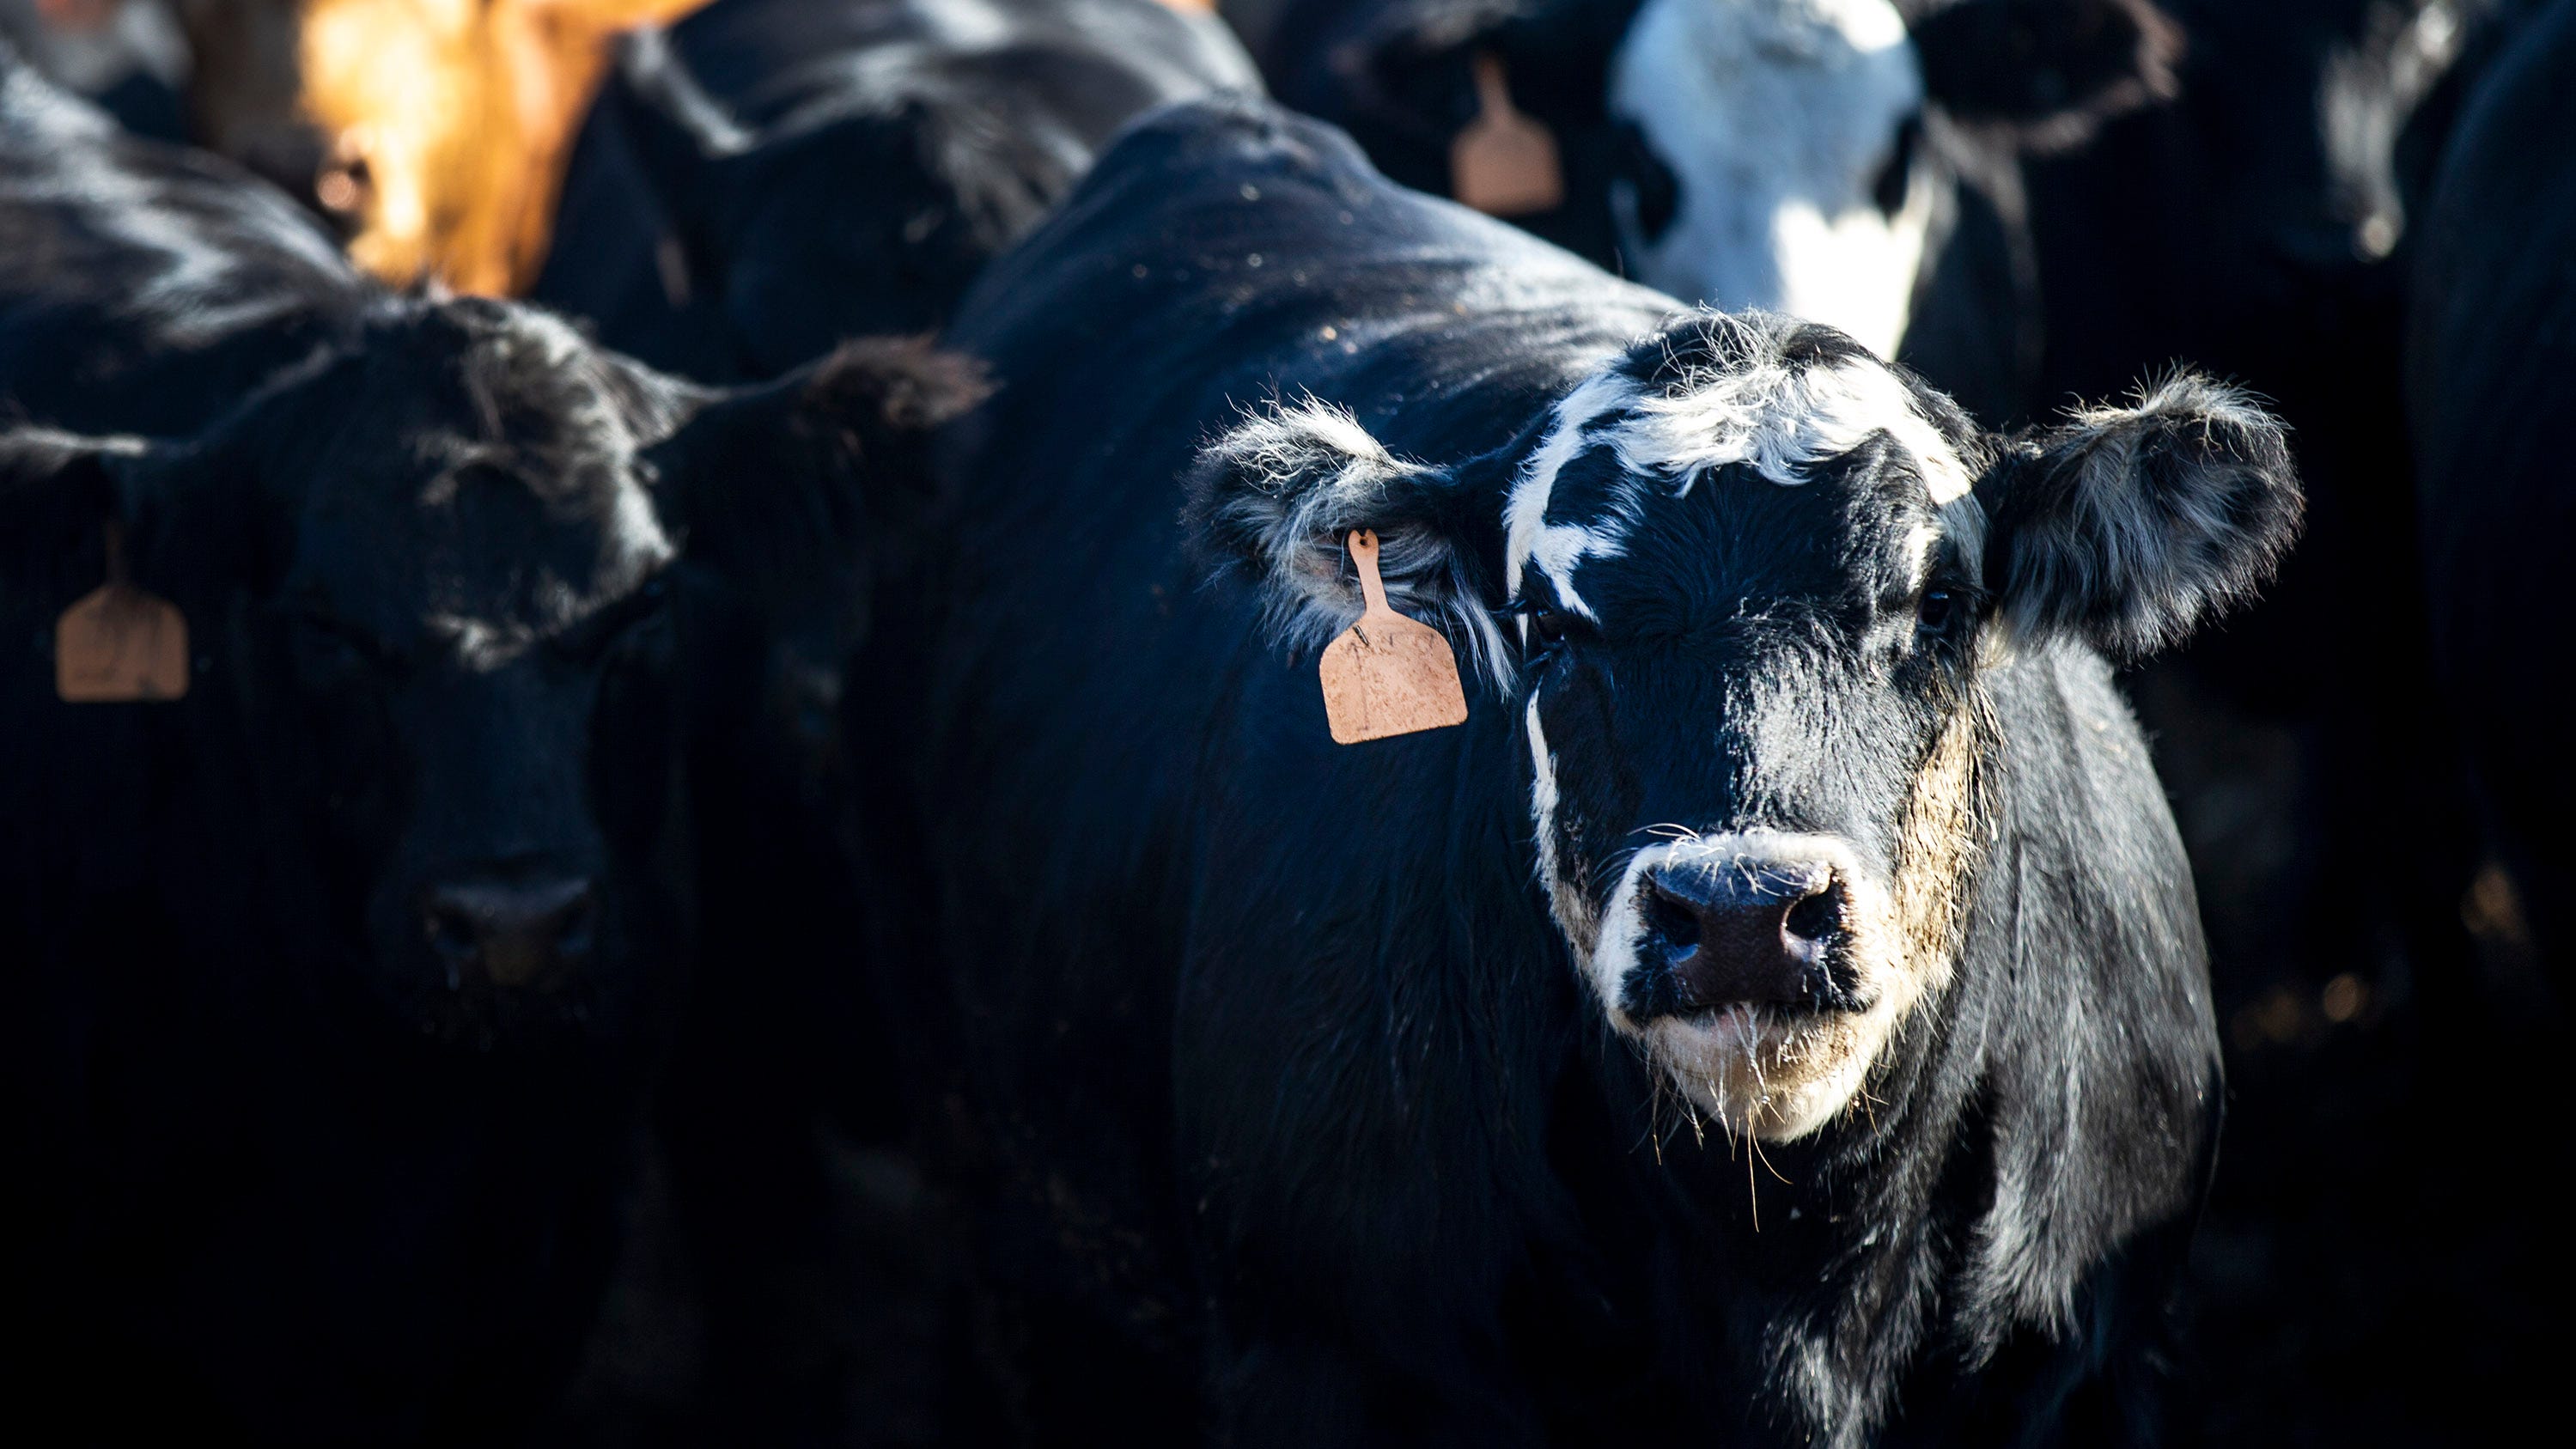 Iowa cattle producers lose money during COVID19 pandemic, even though